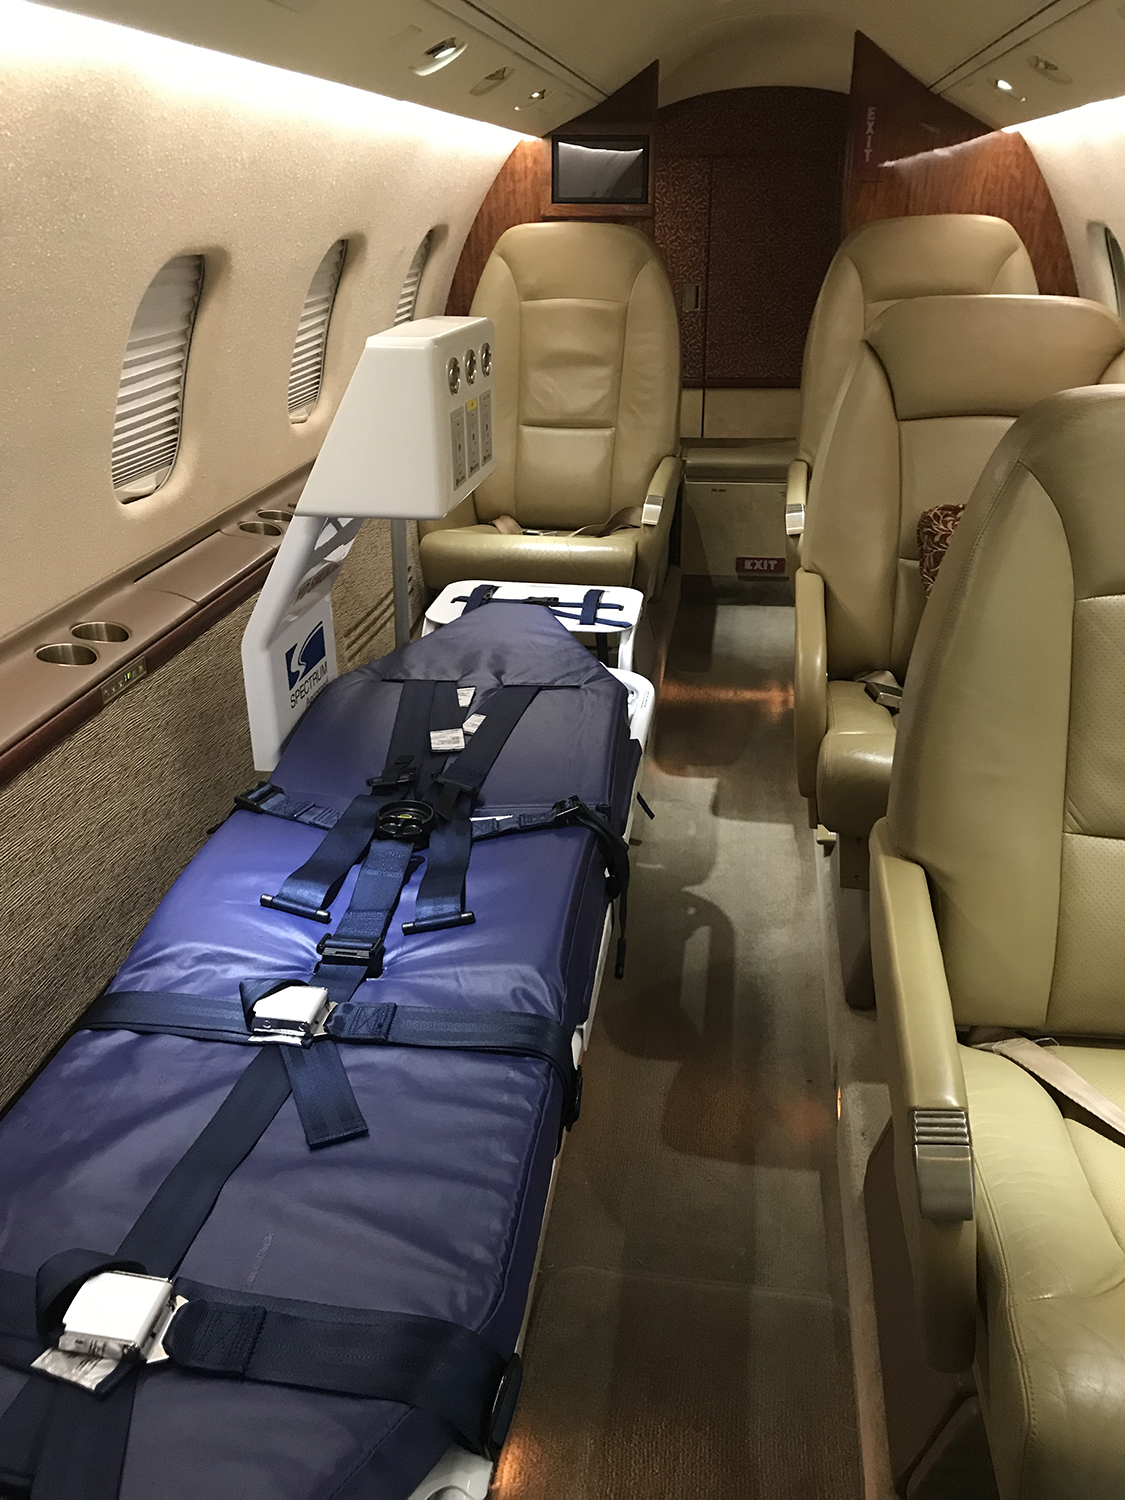 AirCARE1's Learjet Air Ambulance Interior